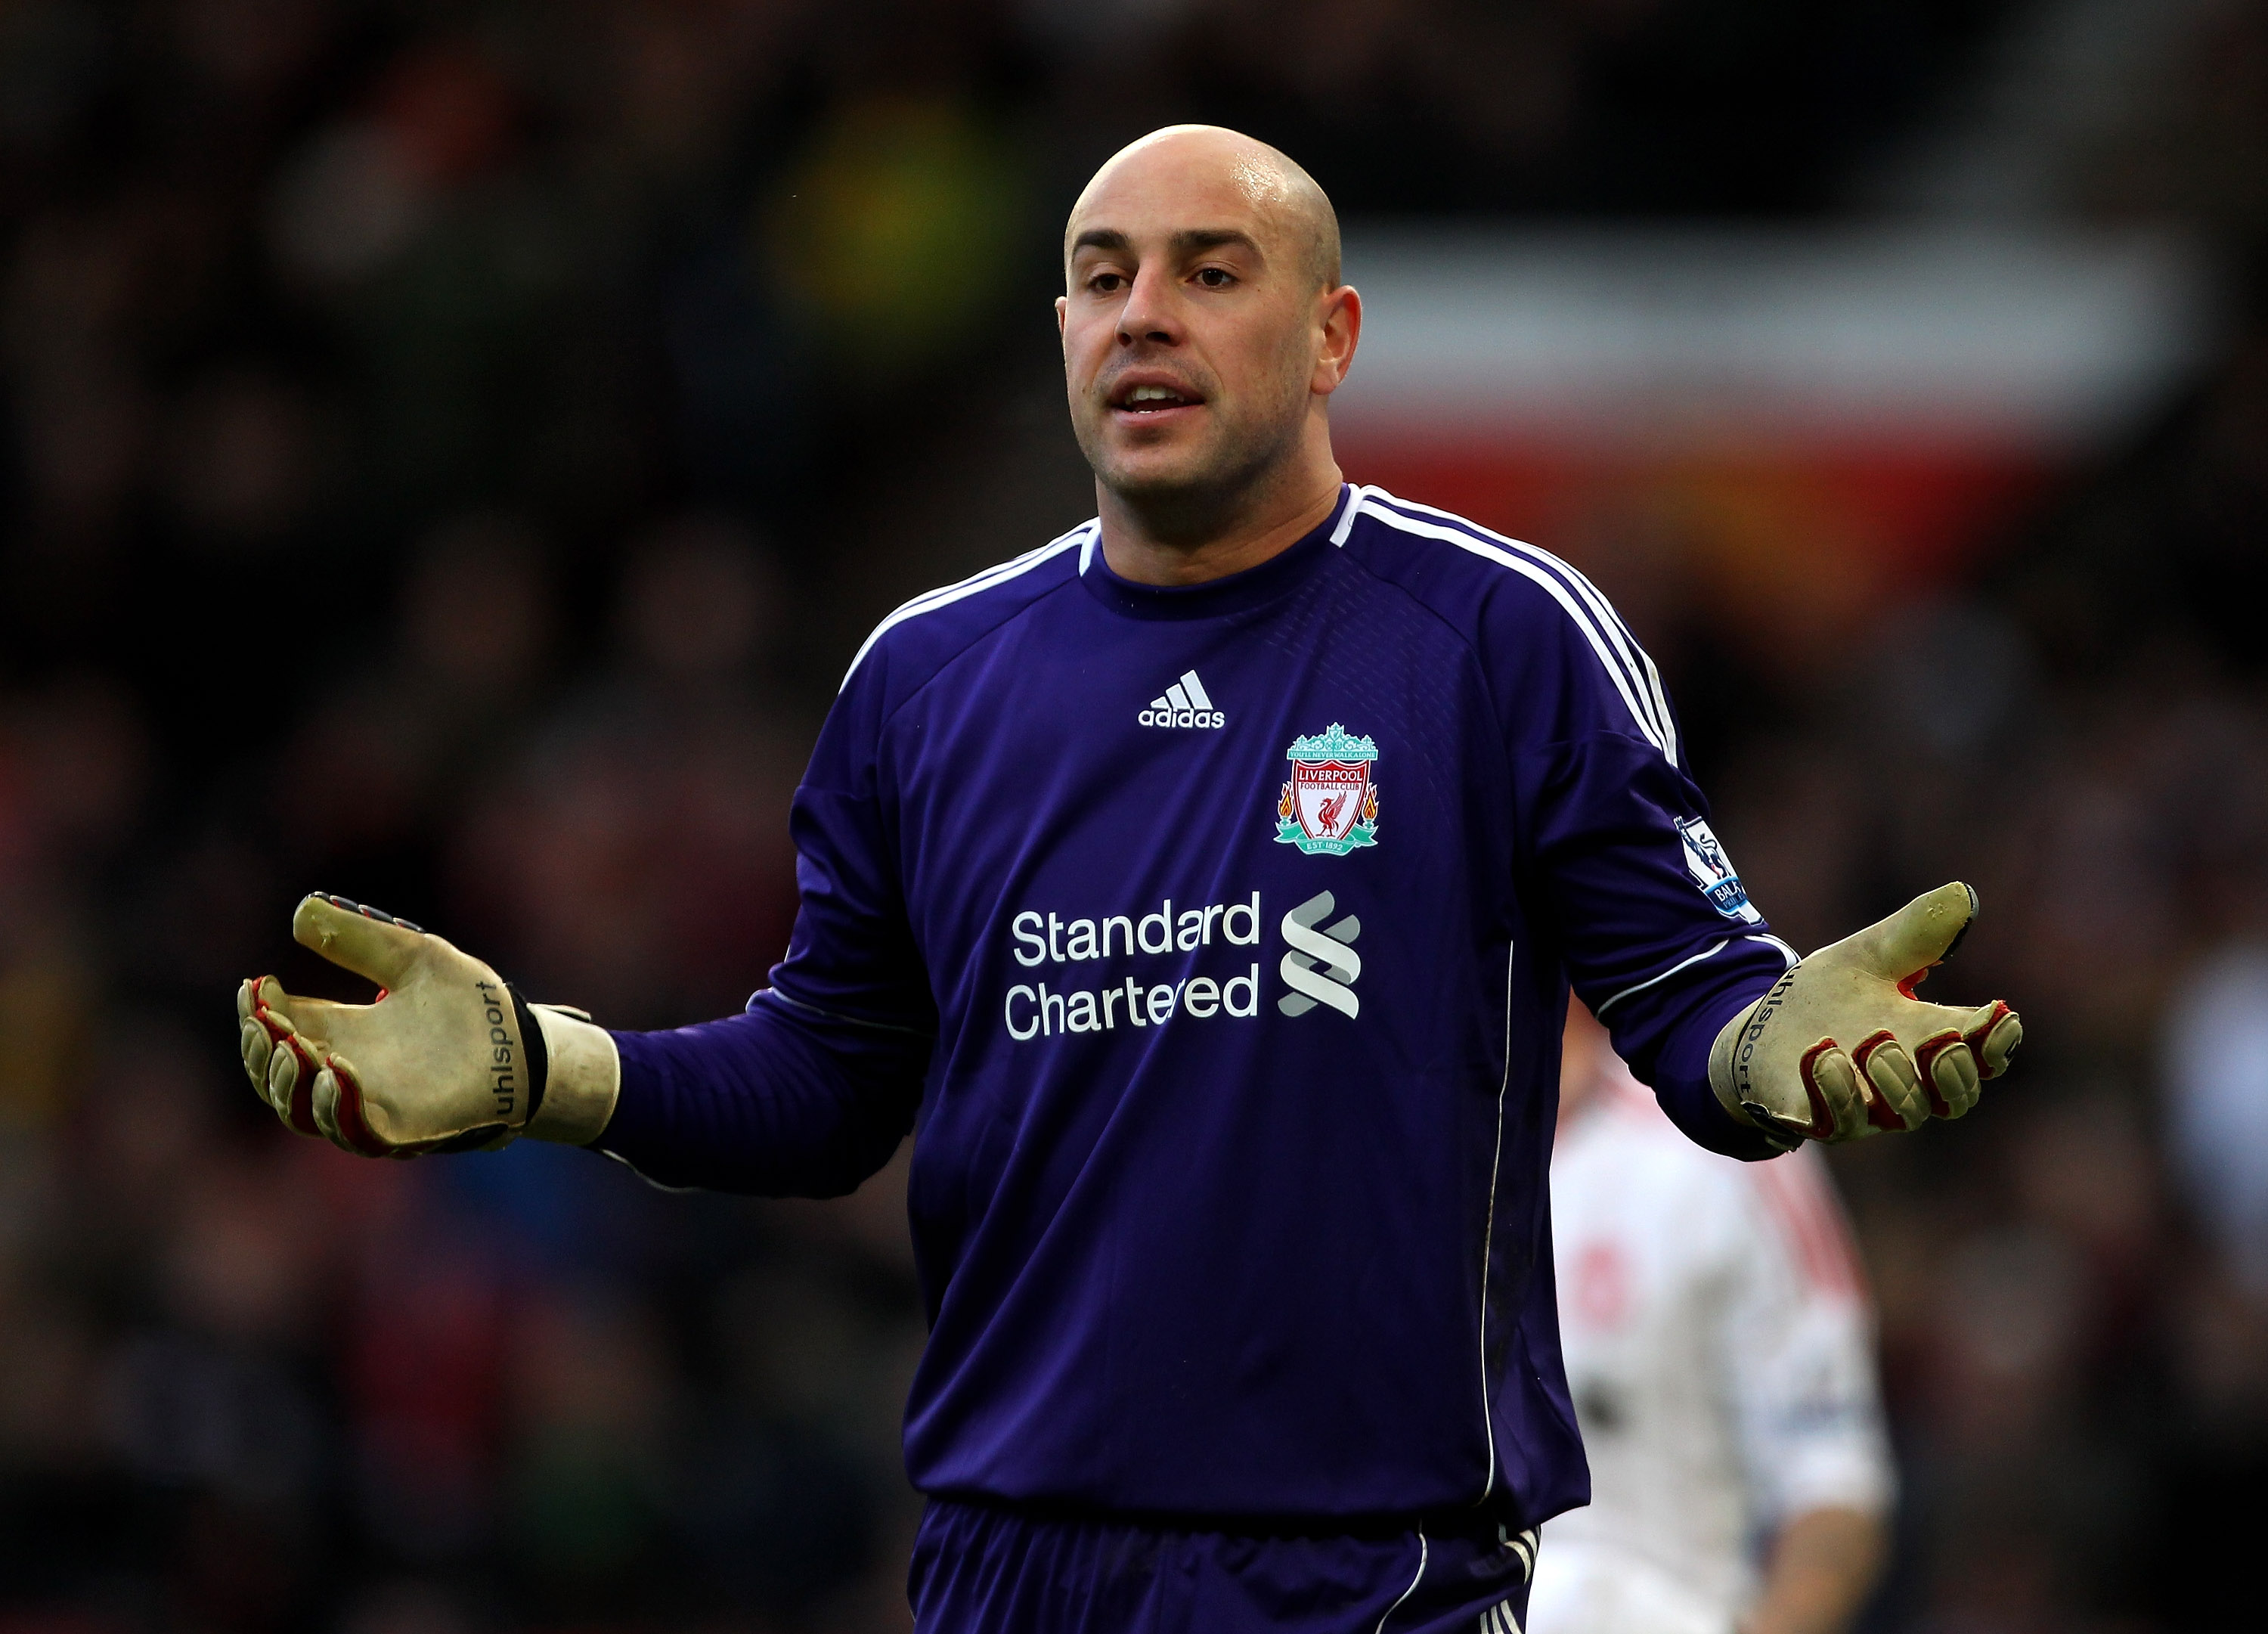 MANCHESTER, ENGLAND - JANUARY 09:  Pepe Reina of Liverpool gestures during the FA Cup sponsored by E.ON 3rd round match between Manchester United and Liverpool at Old Trafford on January 9, 2011 in Manchester, England. (Photo by Alex Livesey/Getty Images)